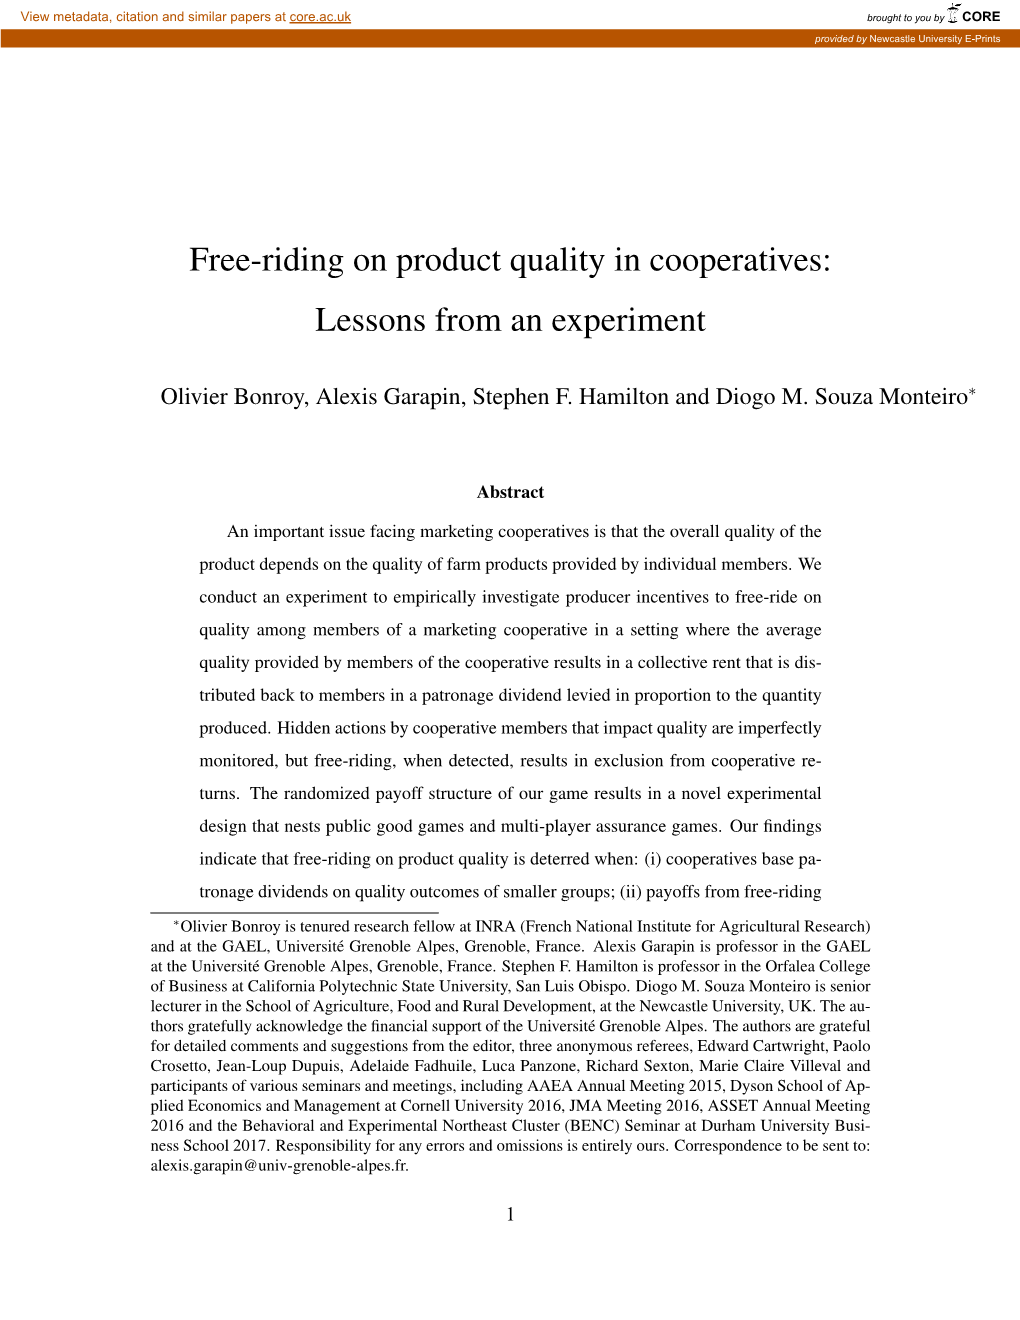 Free-Riding on Product Quality in Cooperatives: Lessons from an Experiment